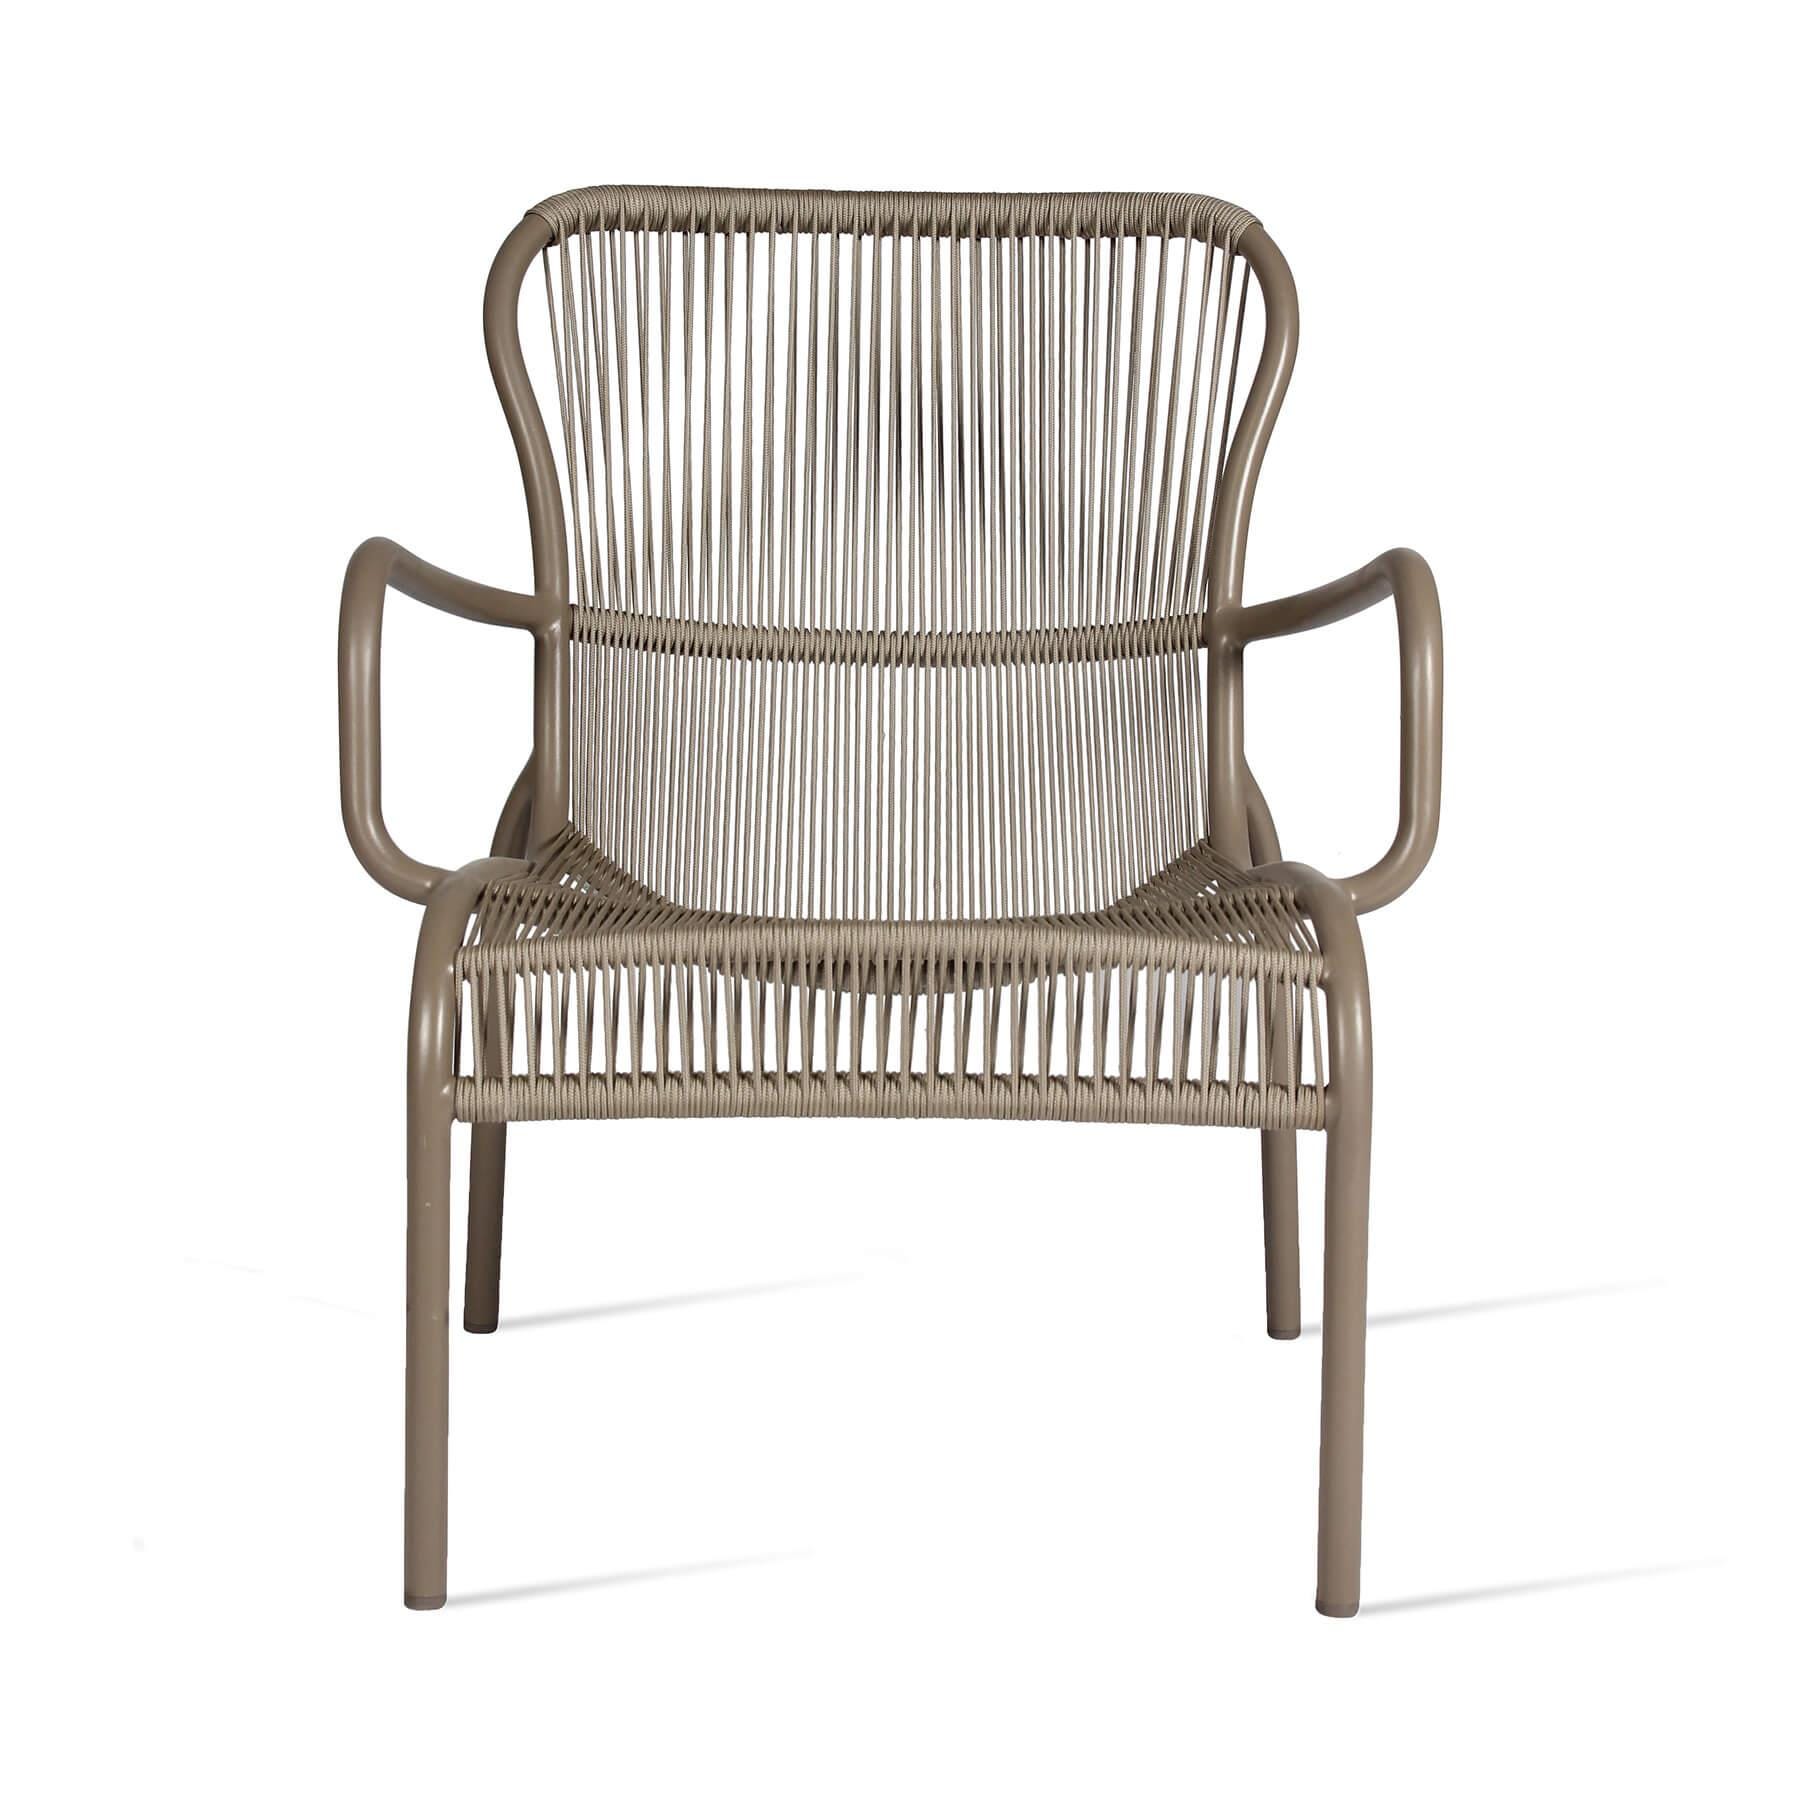 Vincent Sheppard Loop Garden Lounge Chair Taupe Grey Designer Furniture From Holloways Of Ludlow